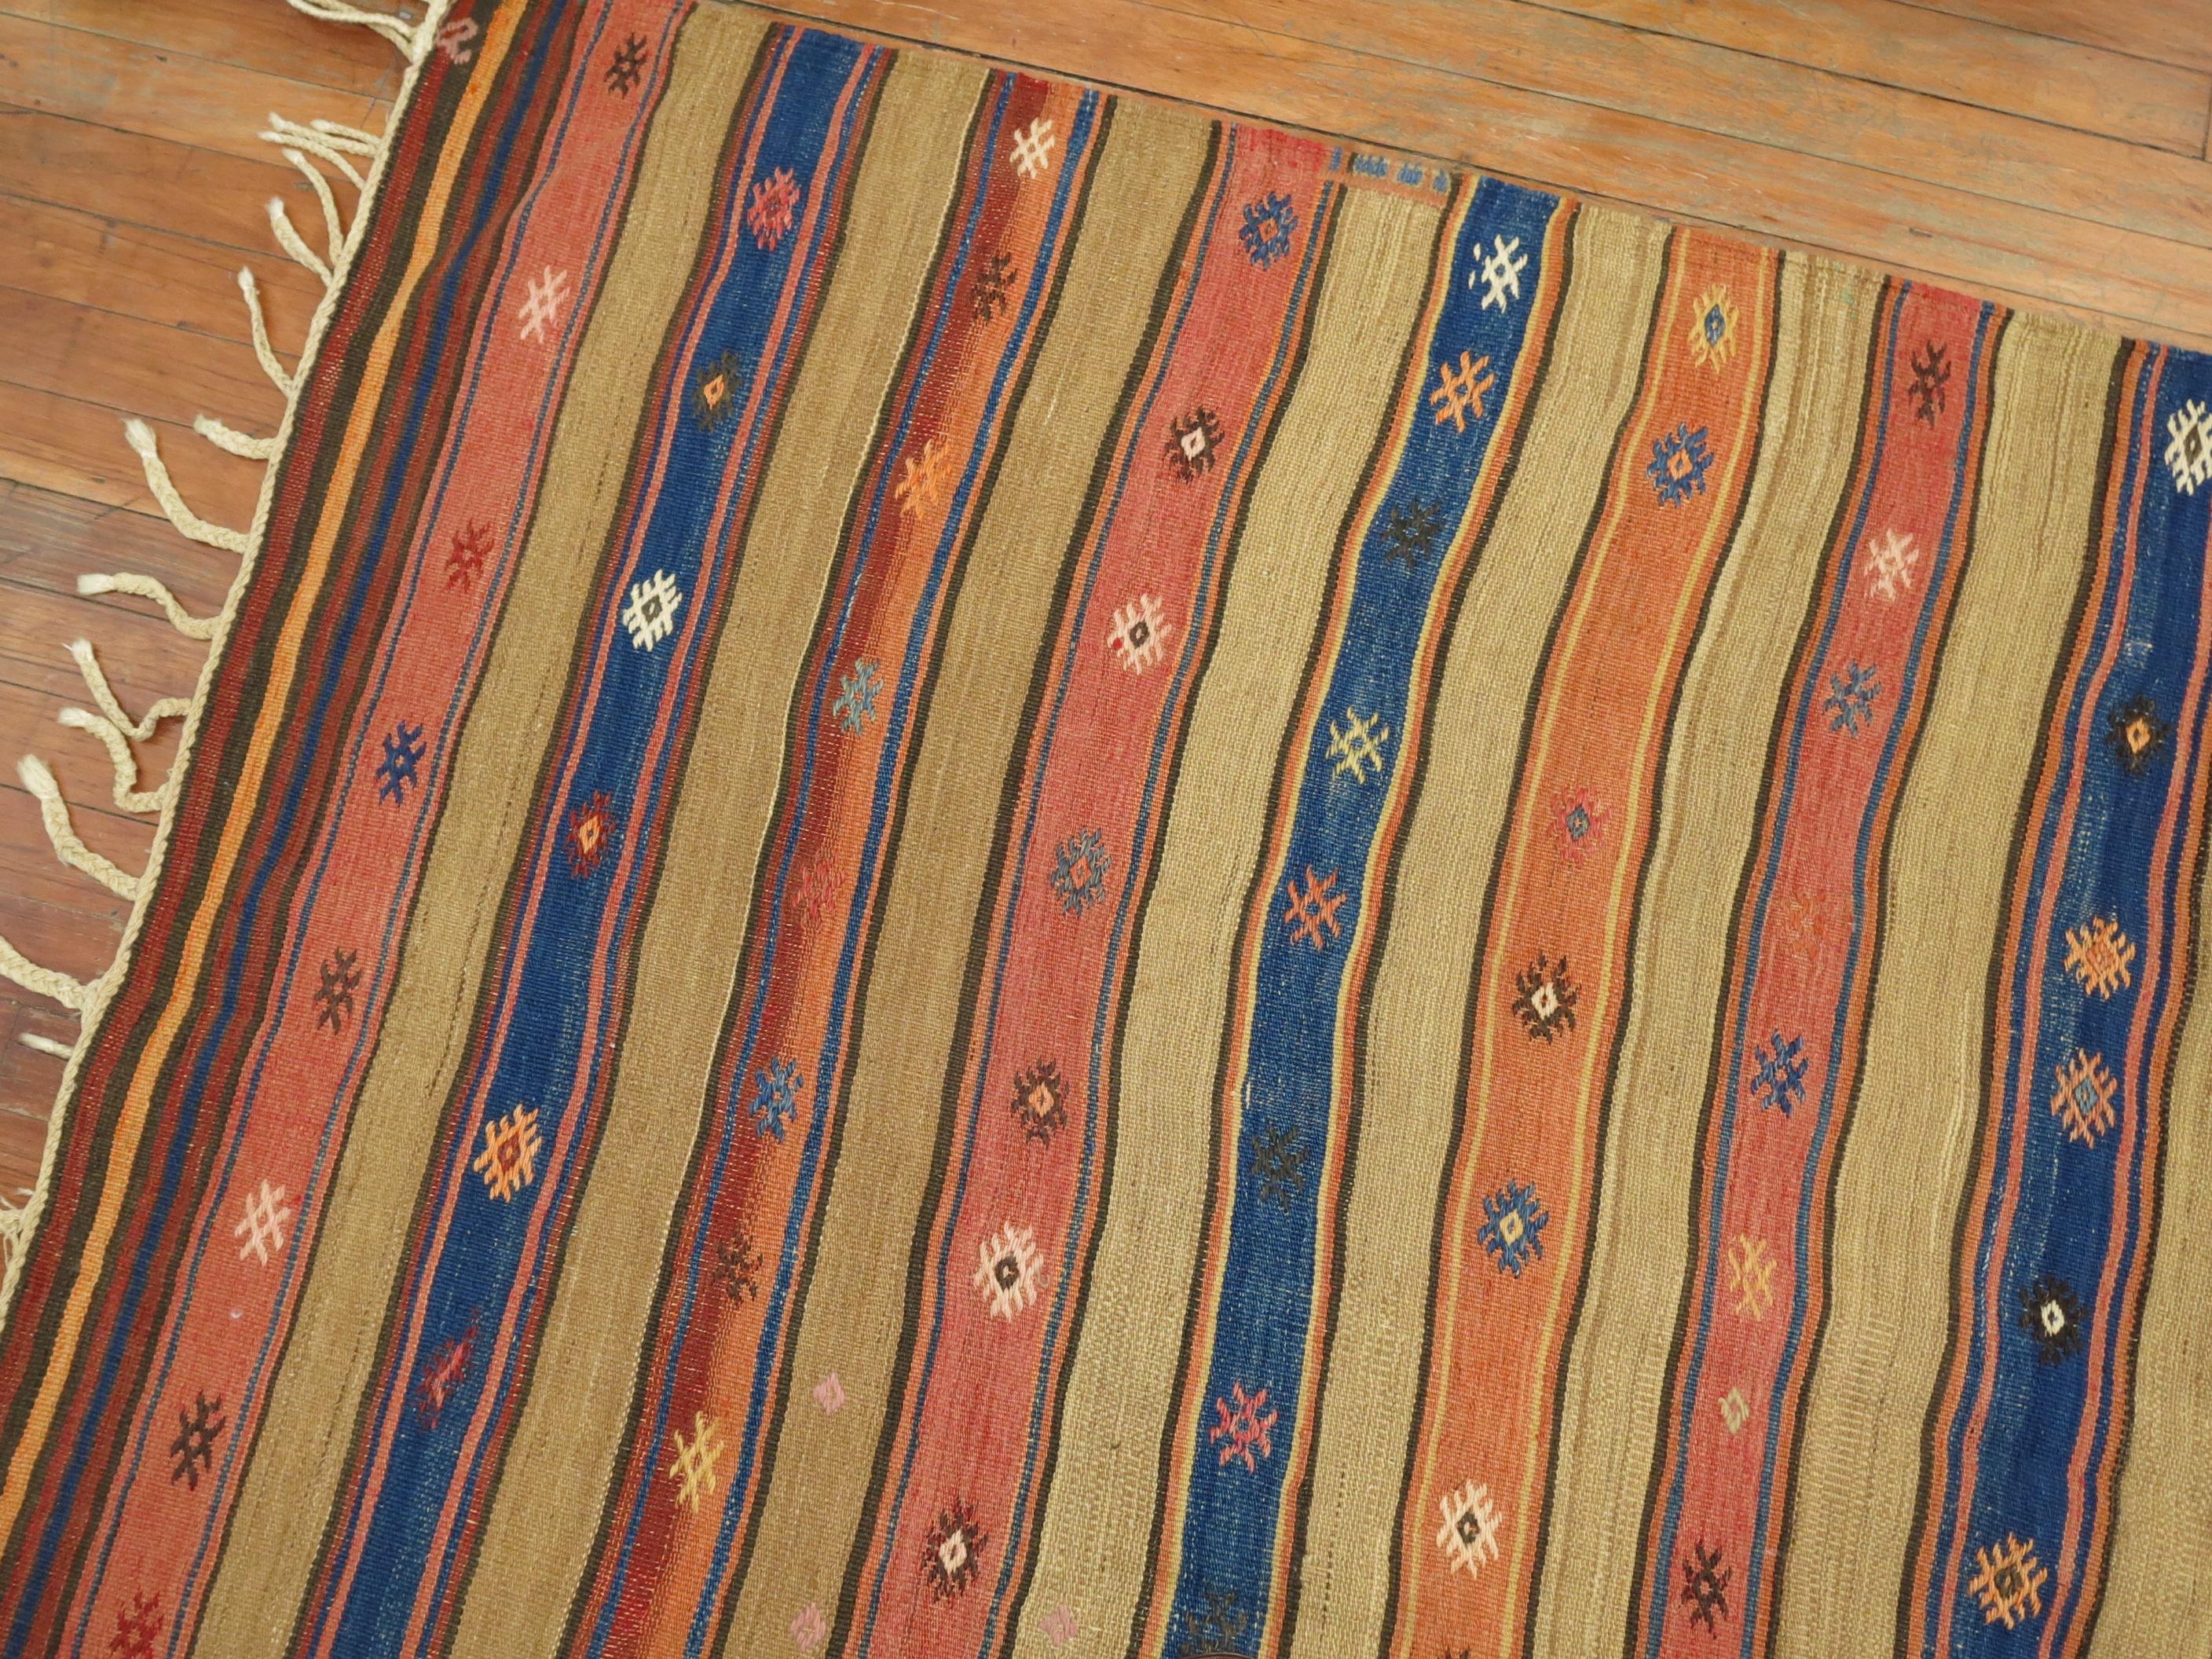 Turkish Kilim from the 2nd quarter of the 20th century with a rustic-like pattern.

Measures: 5' x 8'.